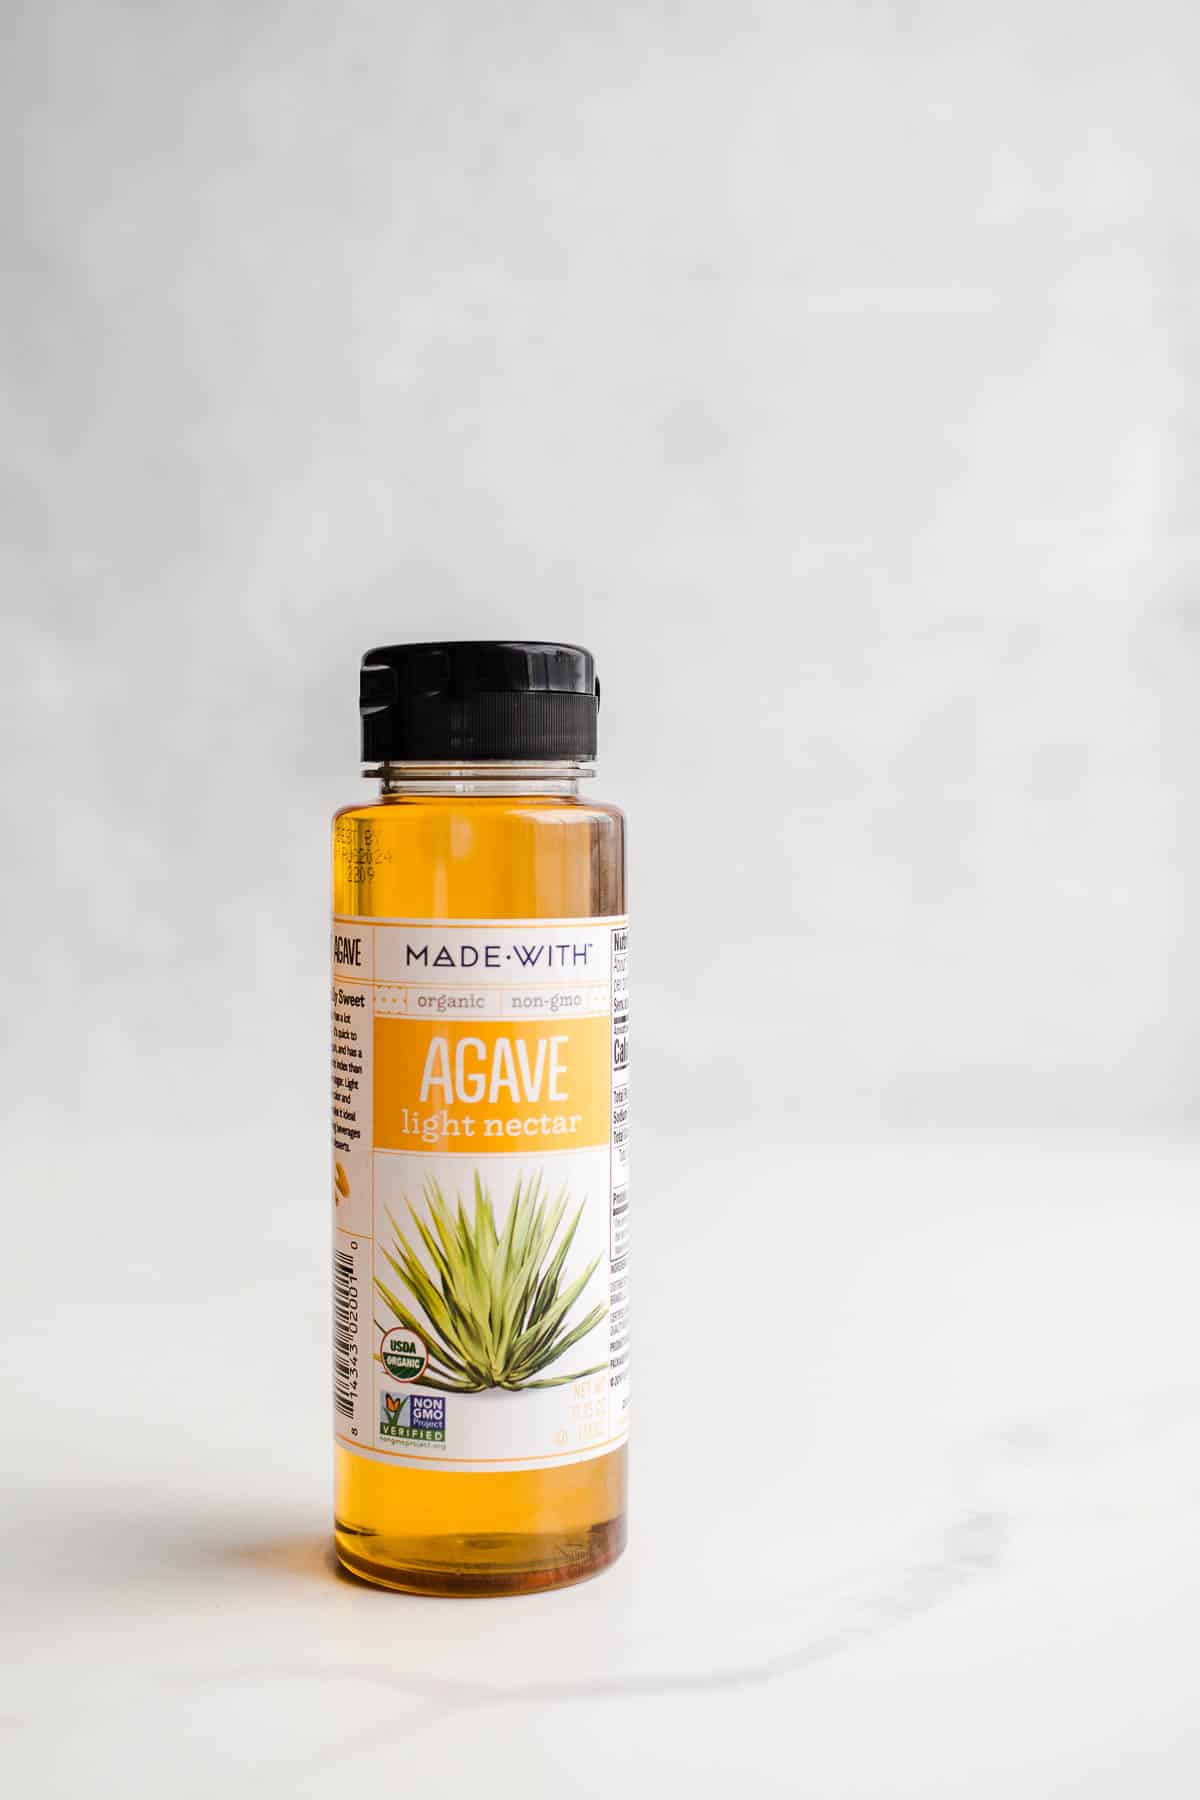 A slim bottle with light golden syrup on a marble surface.